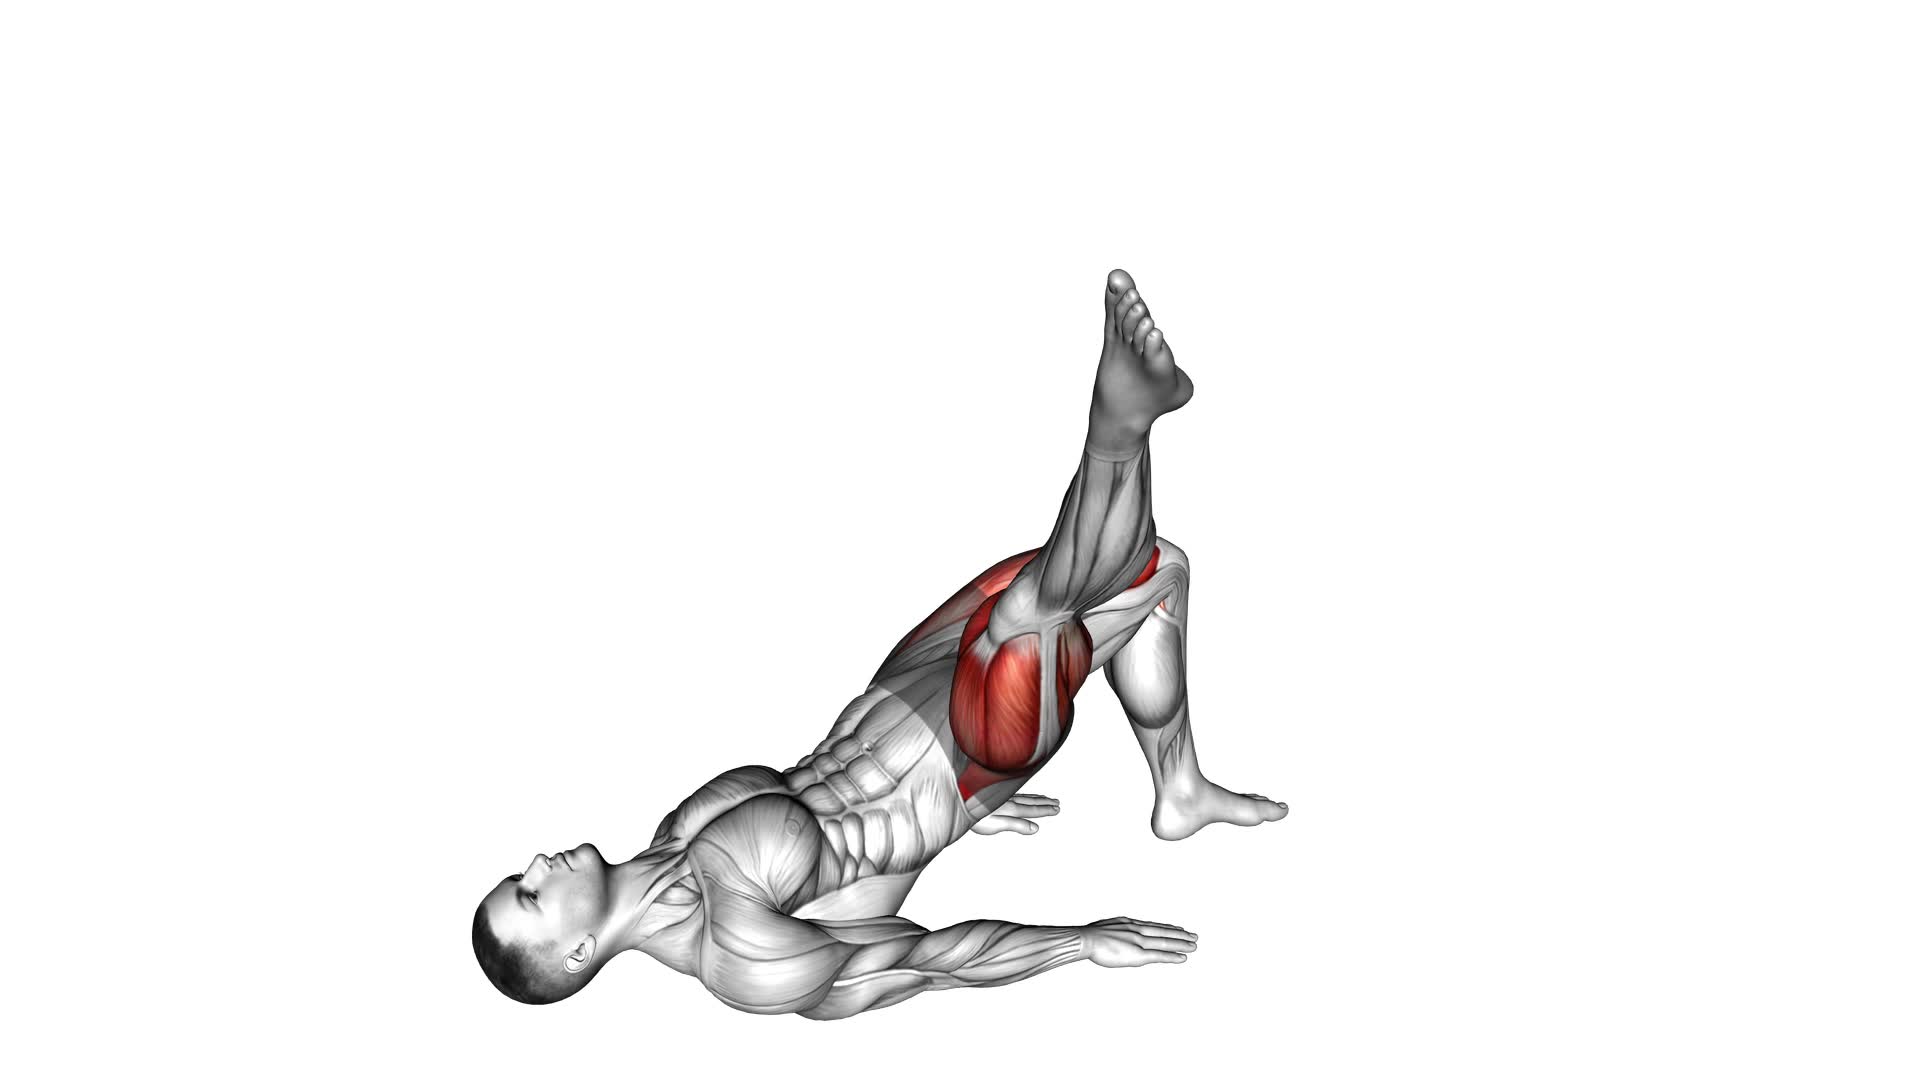 Single Leg Glute Bridge With External Rotation - Video Exercise Guide & Tips